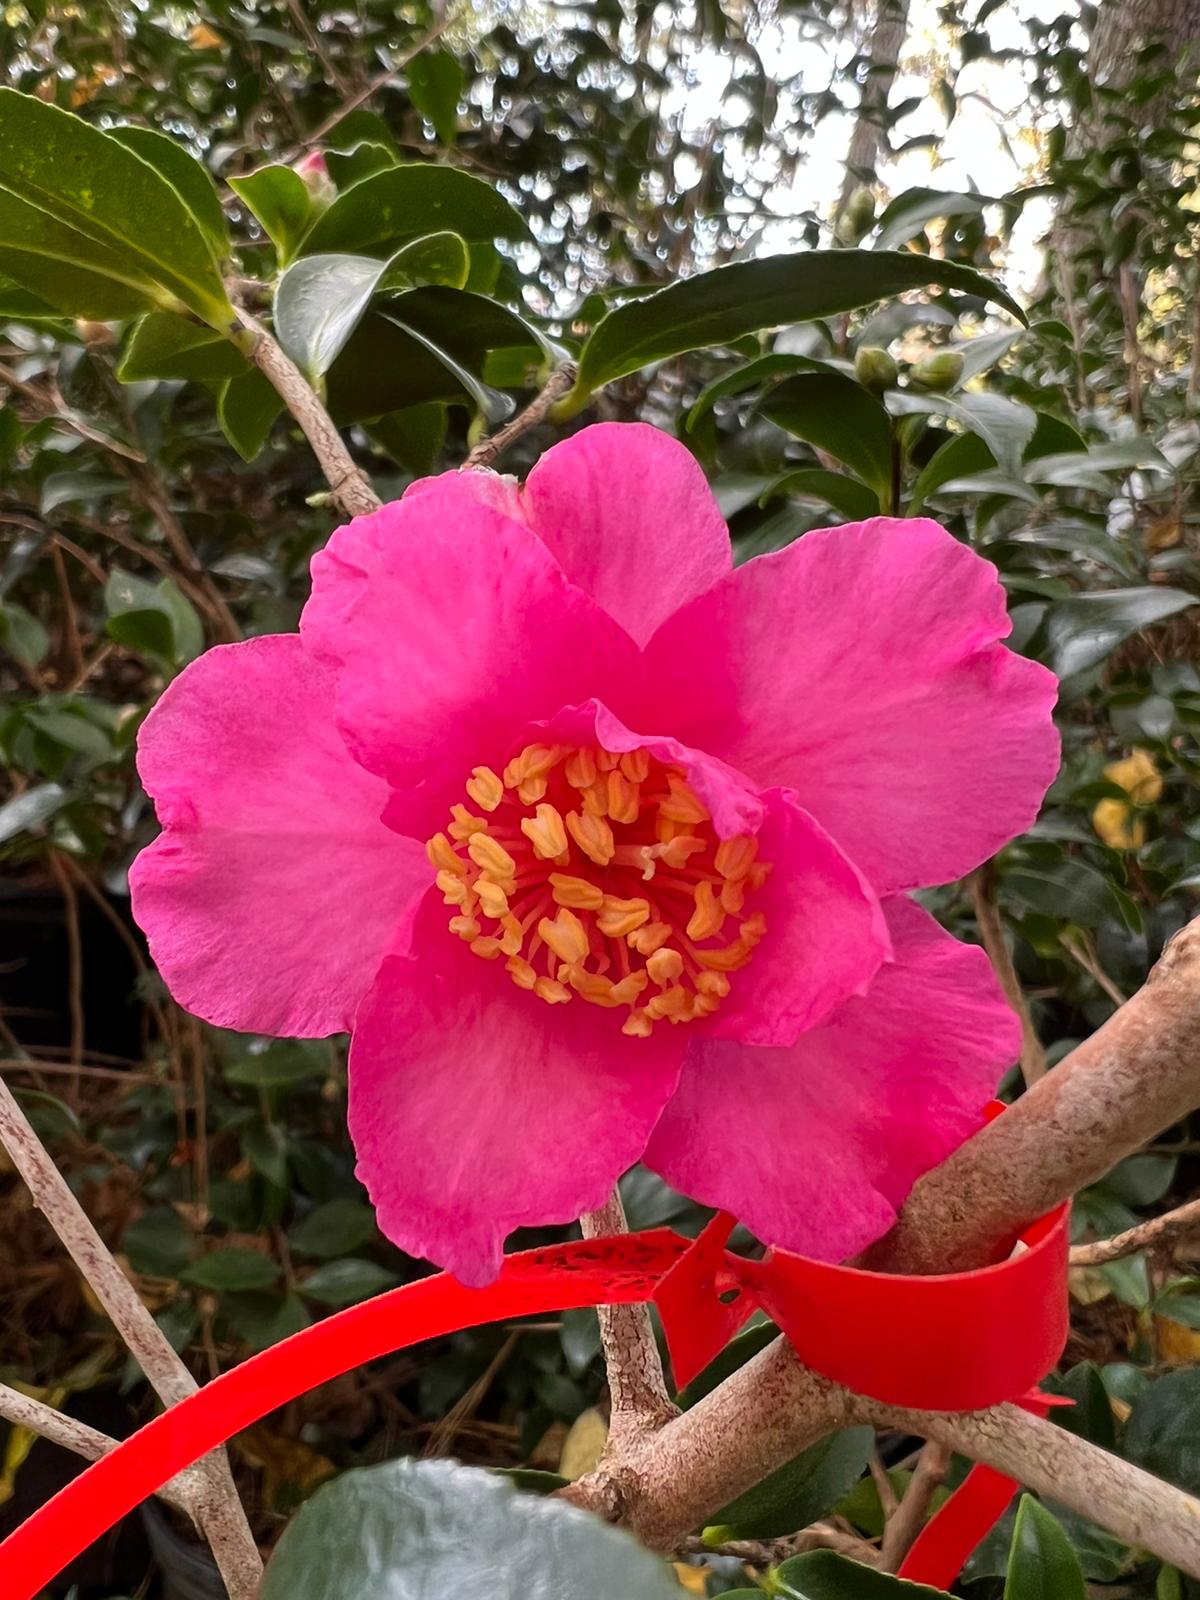 Camellia Autumn Sun-Stunning Showy Red Rose Blooms